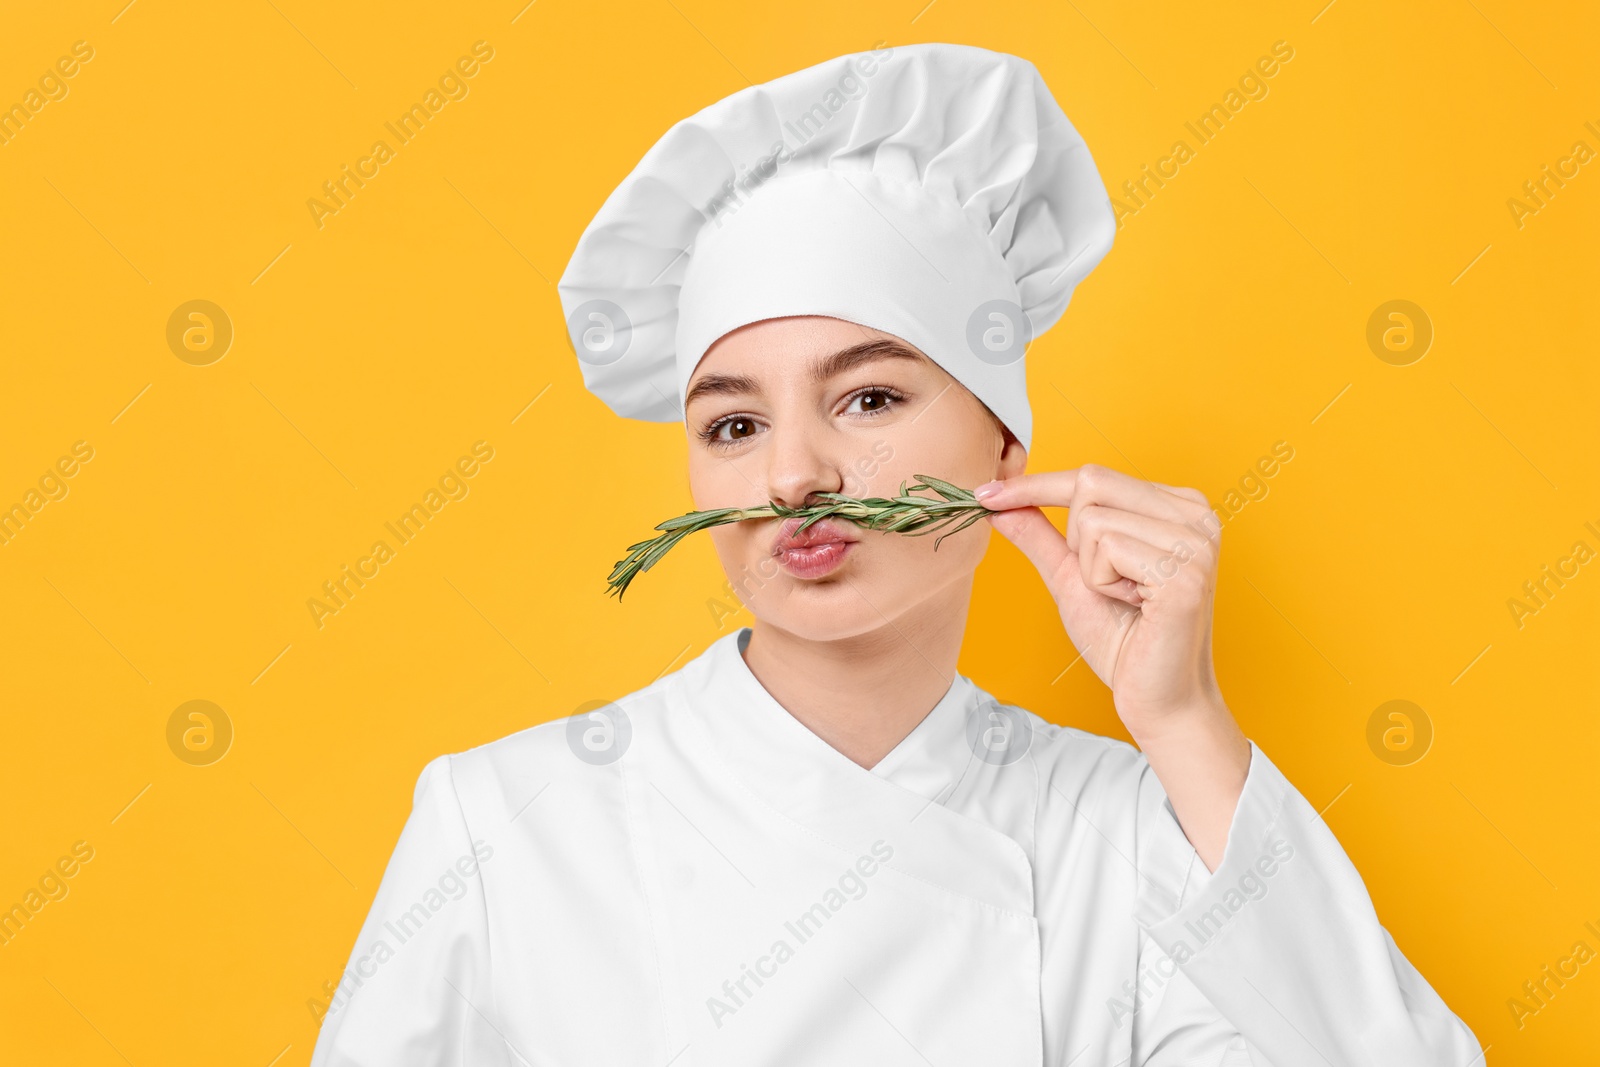 Photo of Professional chef with fresh rosemary having fun on yellow background